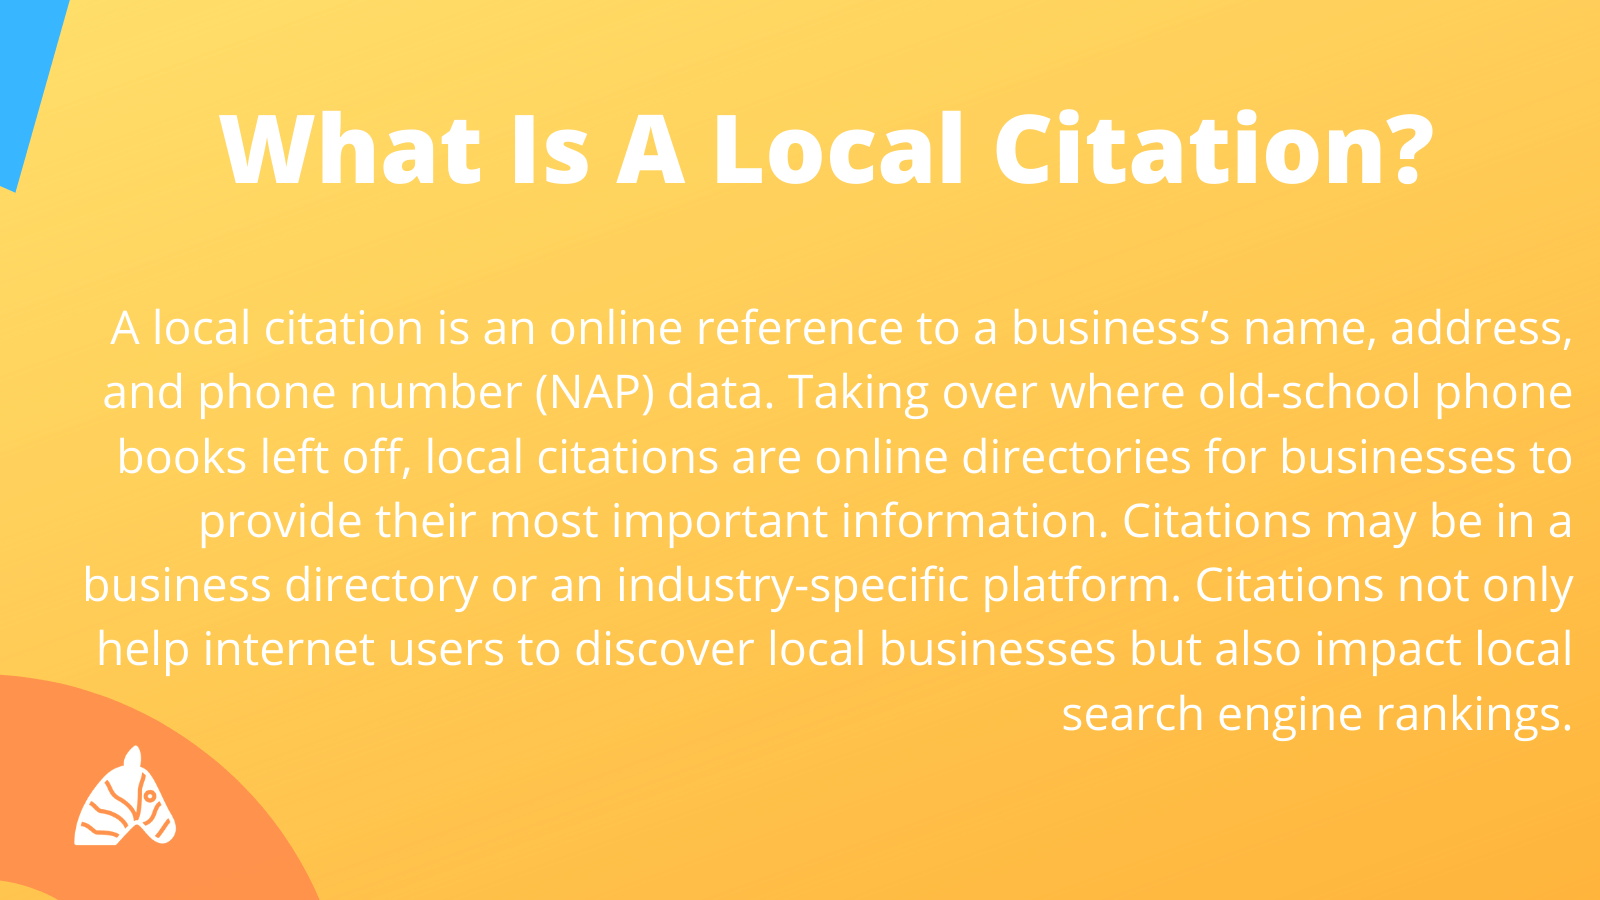 explanation of a local citation or NAP listing